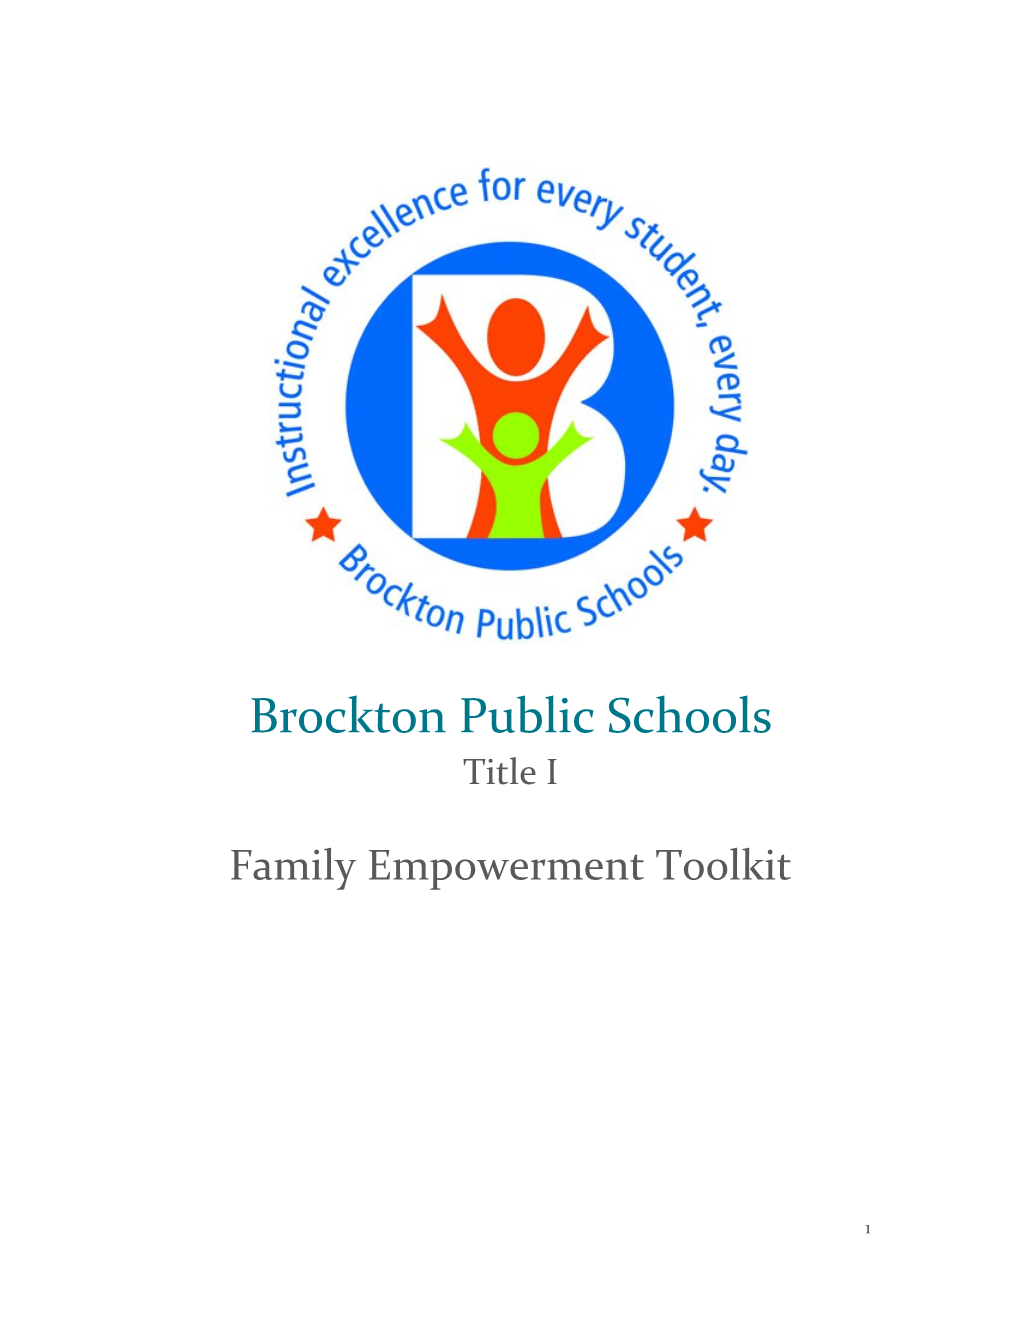 Welcome to the Title I Family Empowerment Toolkit